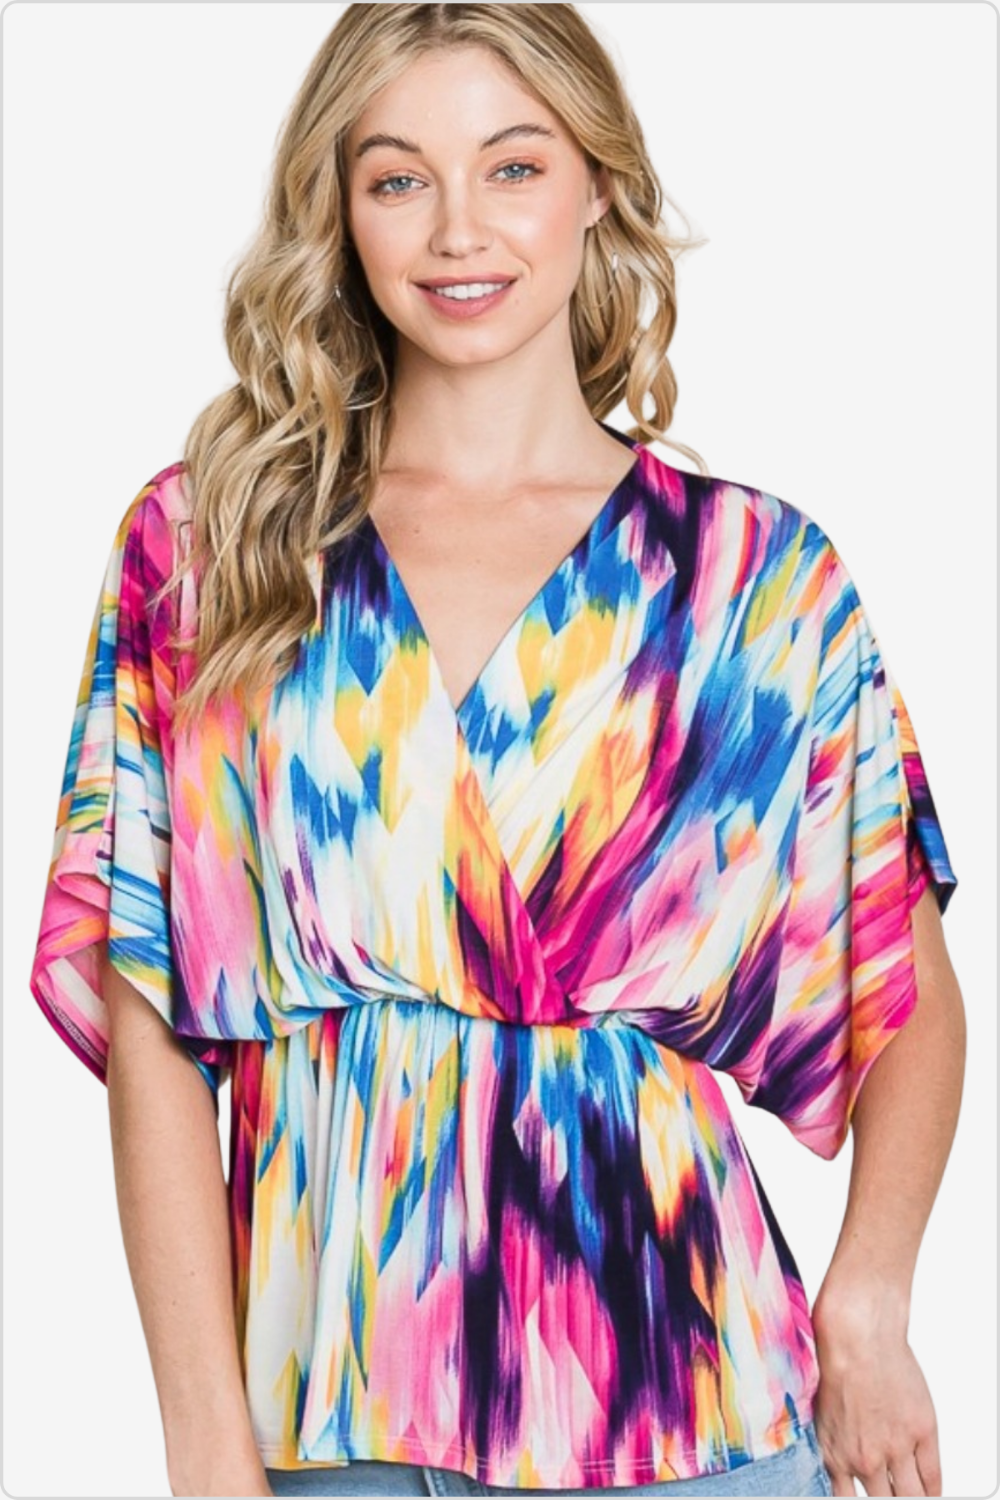 Smiling woman in a vibrant abstract print v-neck blouse with flowing sleeves, perfect for a colorful spring look.